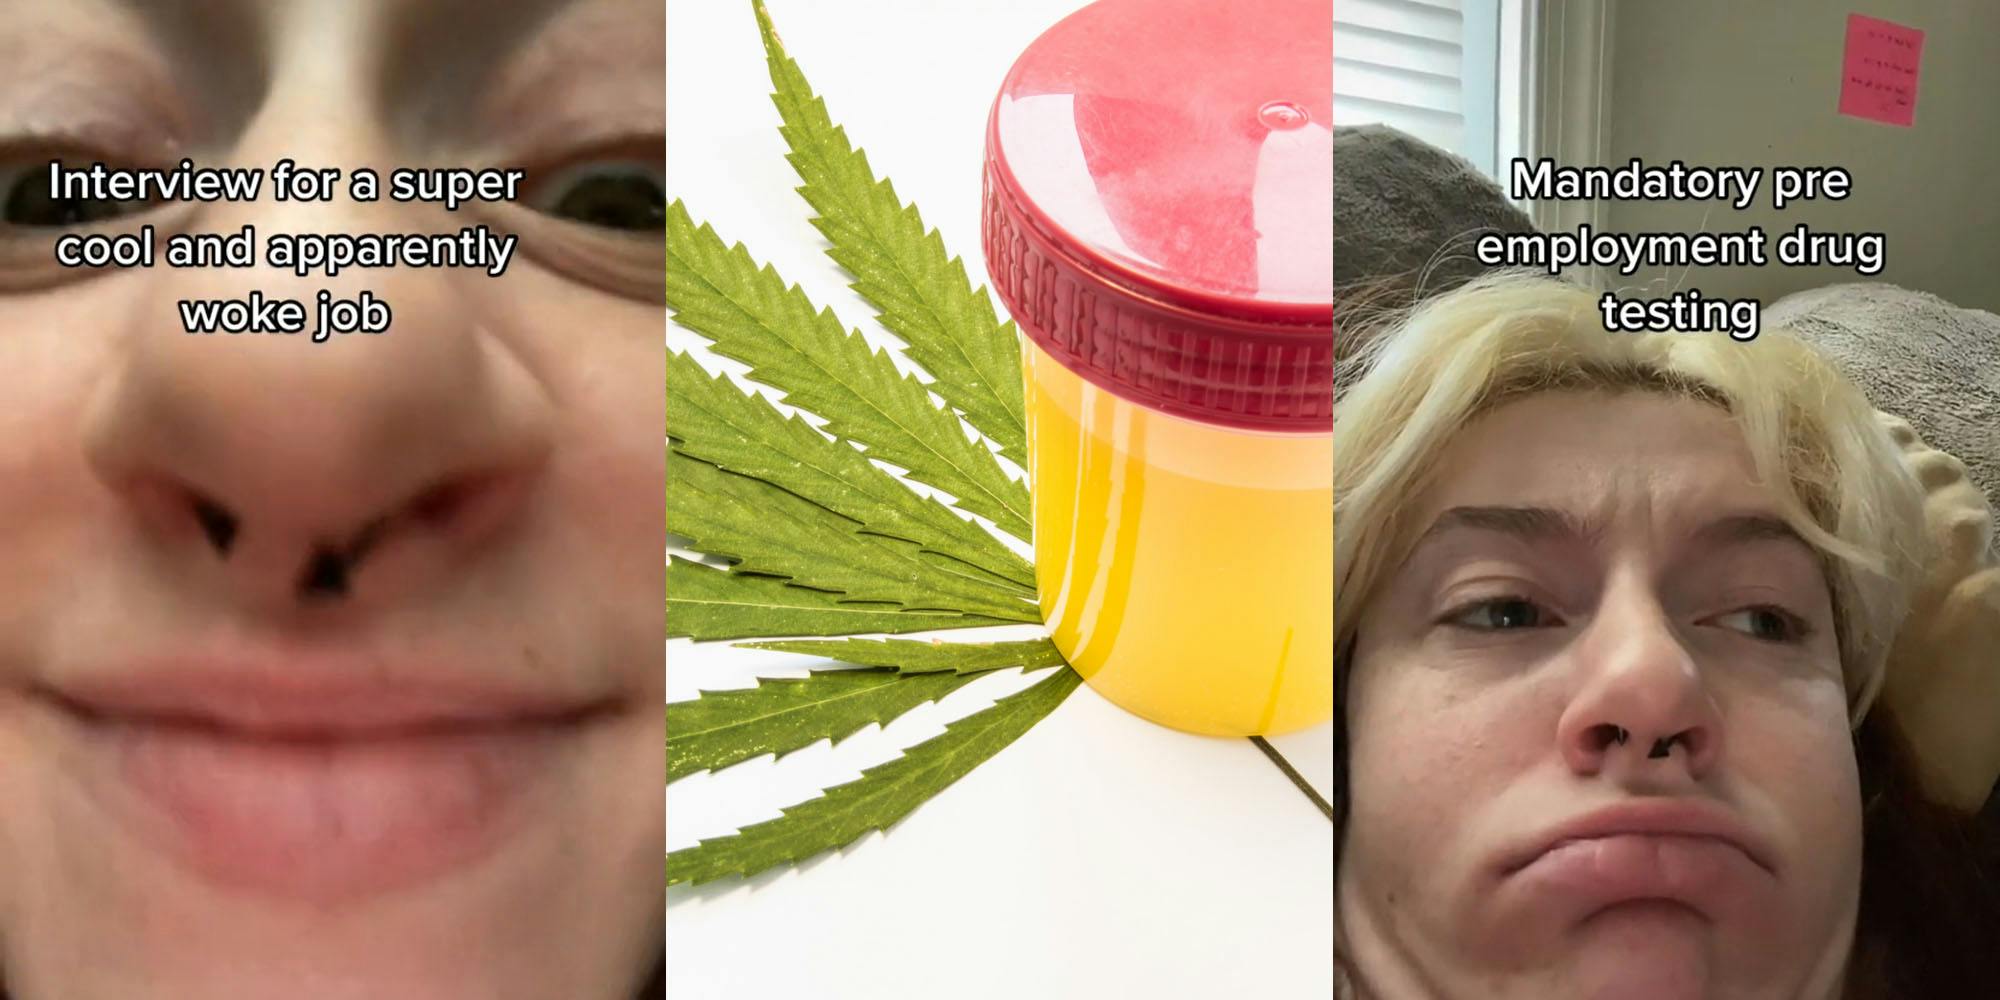 woman face up close caption "interview for a super cool and apparently woke job" (l) Drug test urine in container sitting on marijuana leaf white background (c) Woman making squished face capion "Mandatory pre employment drug testing" (r)